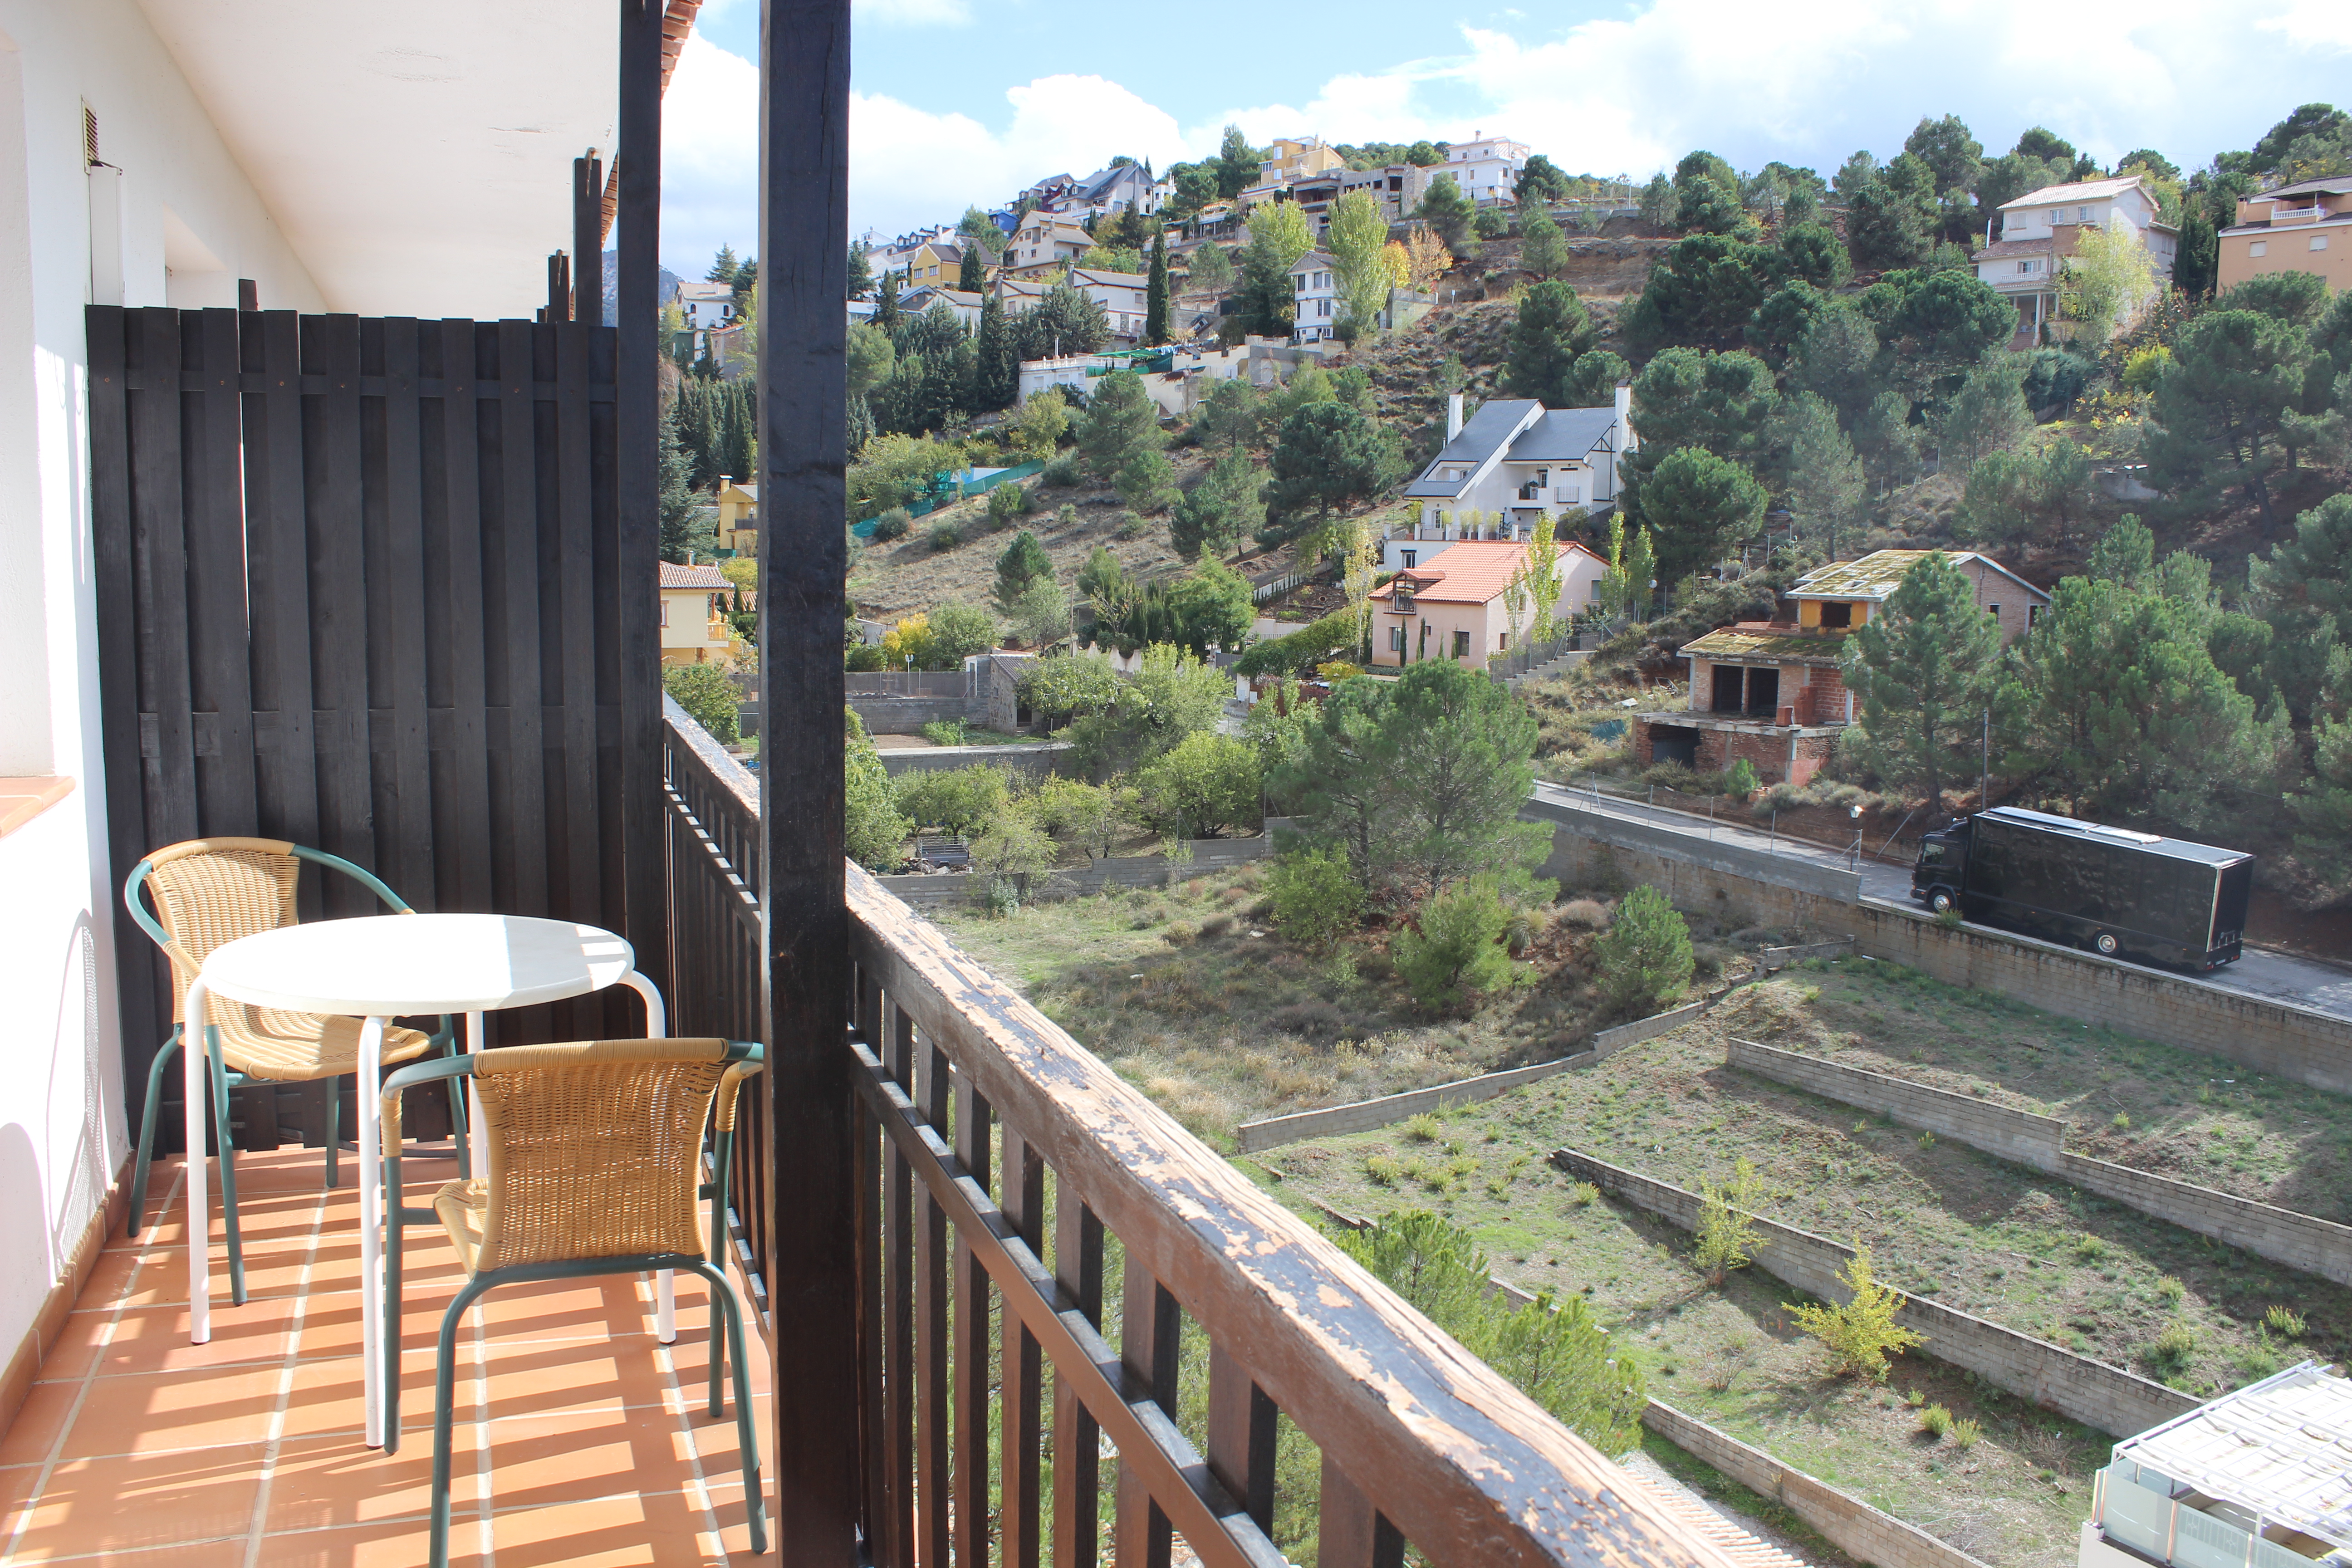 View of the balcony of 5 square meters approx. Available in rooms with views of the surrounding mountains.